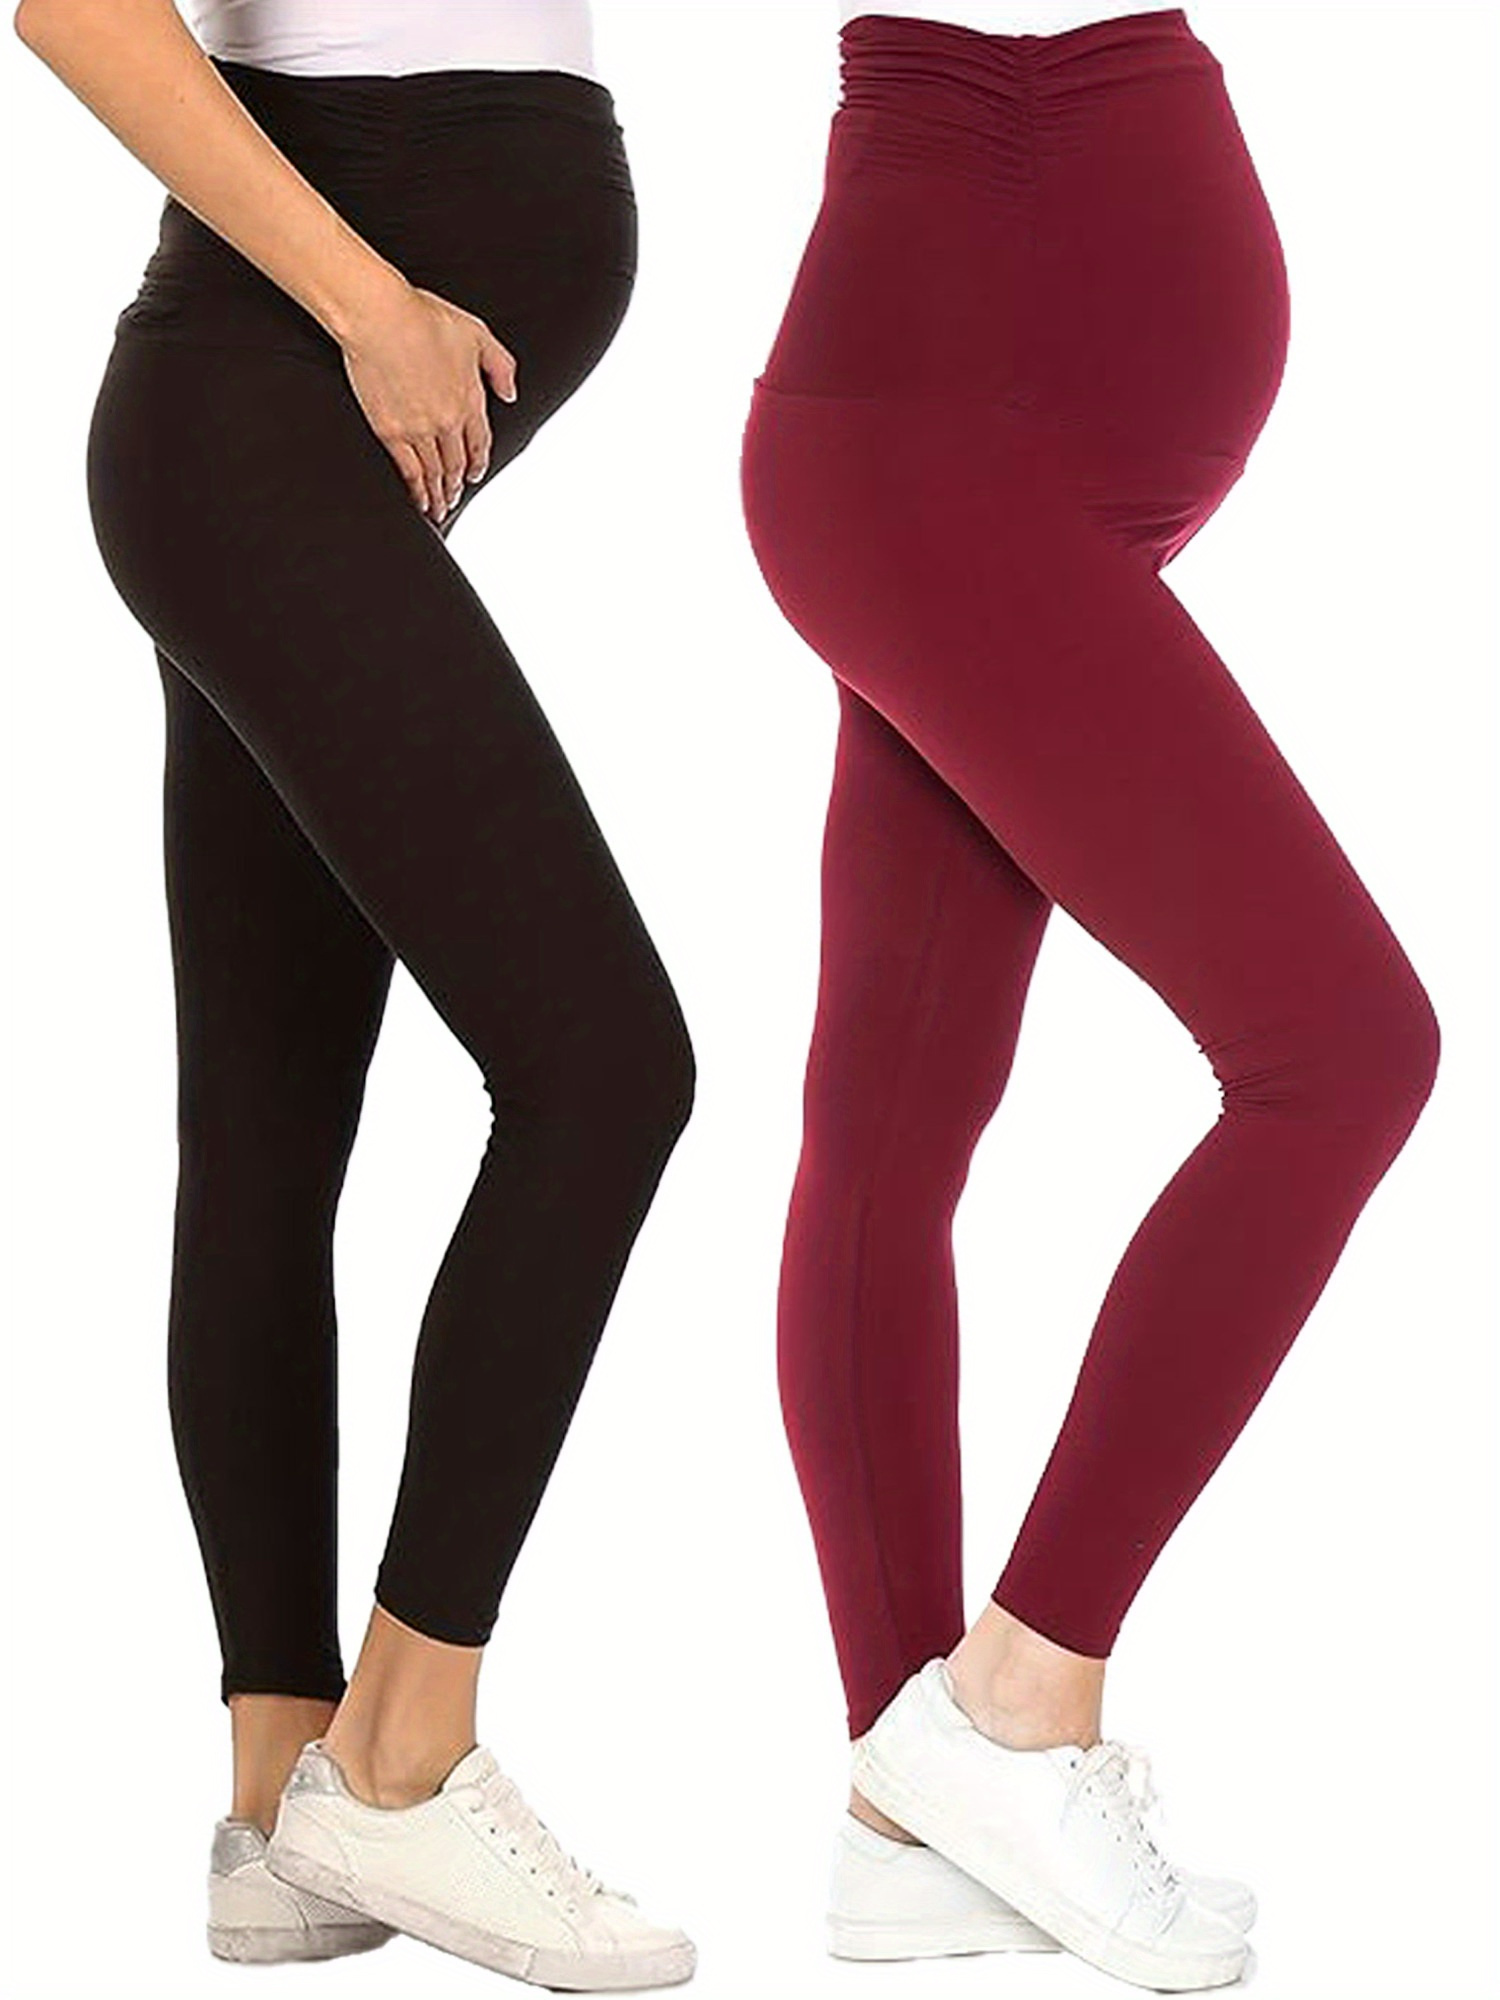 Plus Velvet Maternity Leggings For Autumn/Winter Pregnancy Warm And  Comfortable Pants And Maternity Jogging Bottoms Style 231120 From Huo07,  $14.2